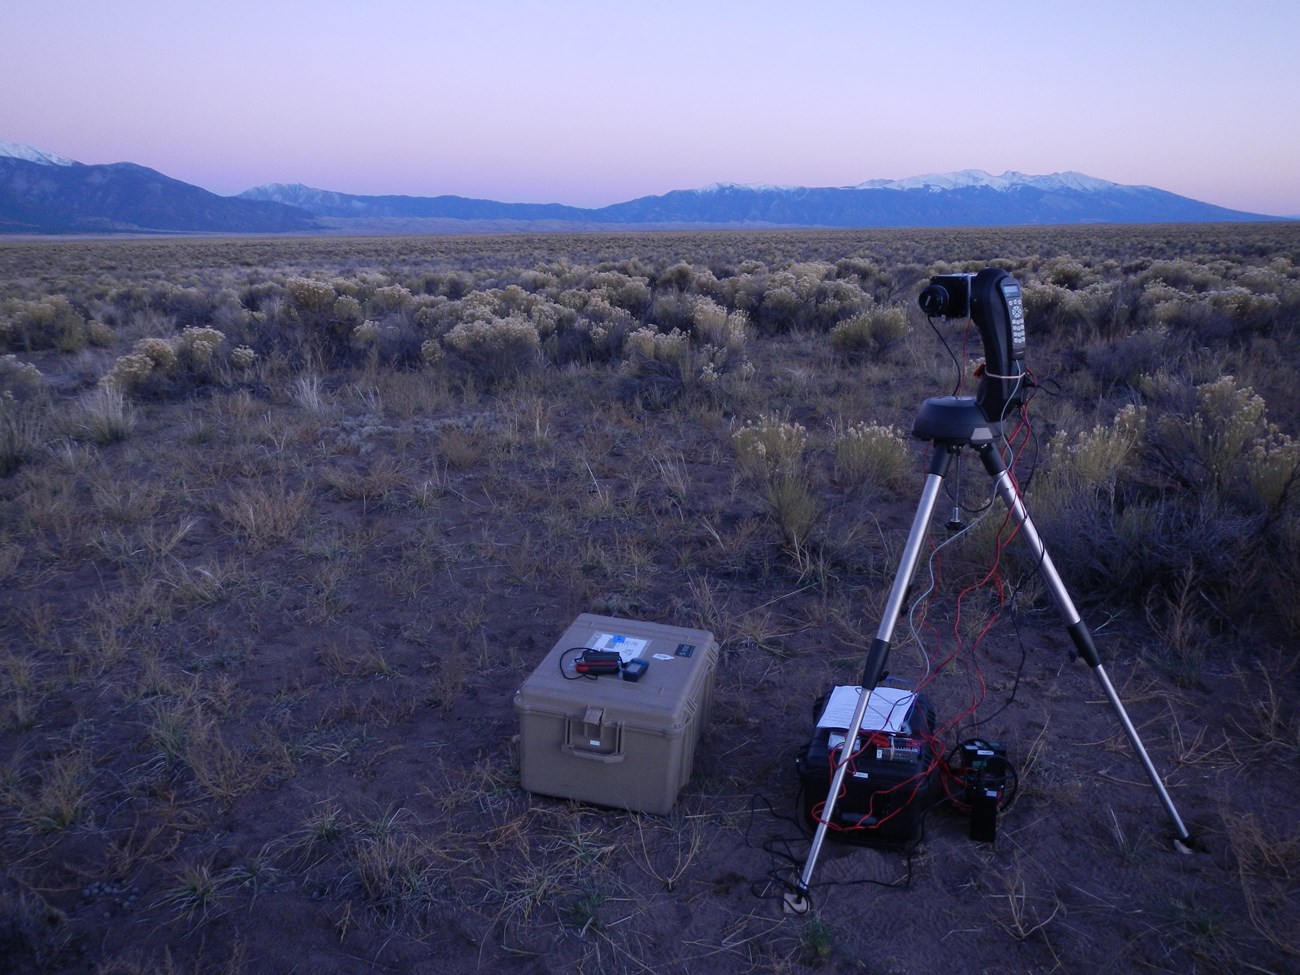 The night sky CCD camera is installed in a high desert prairie location with snow-capped mountains beyond.